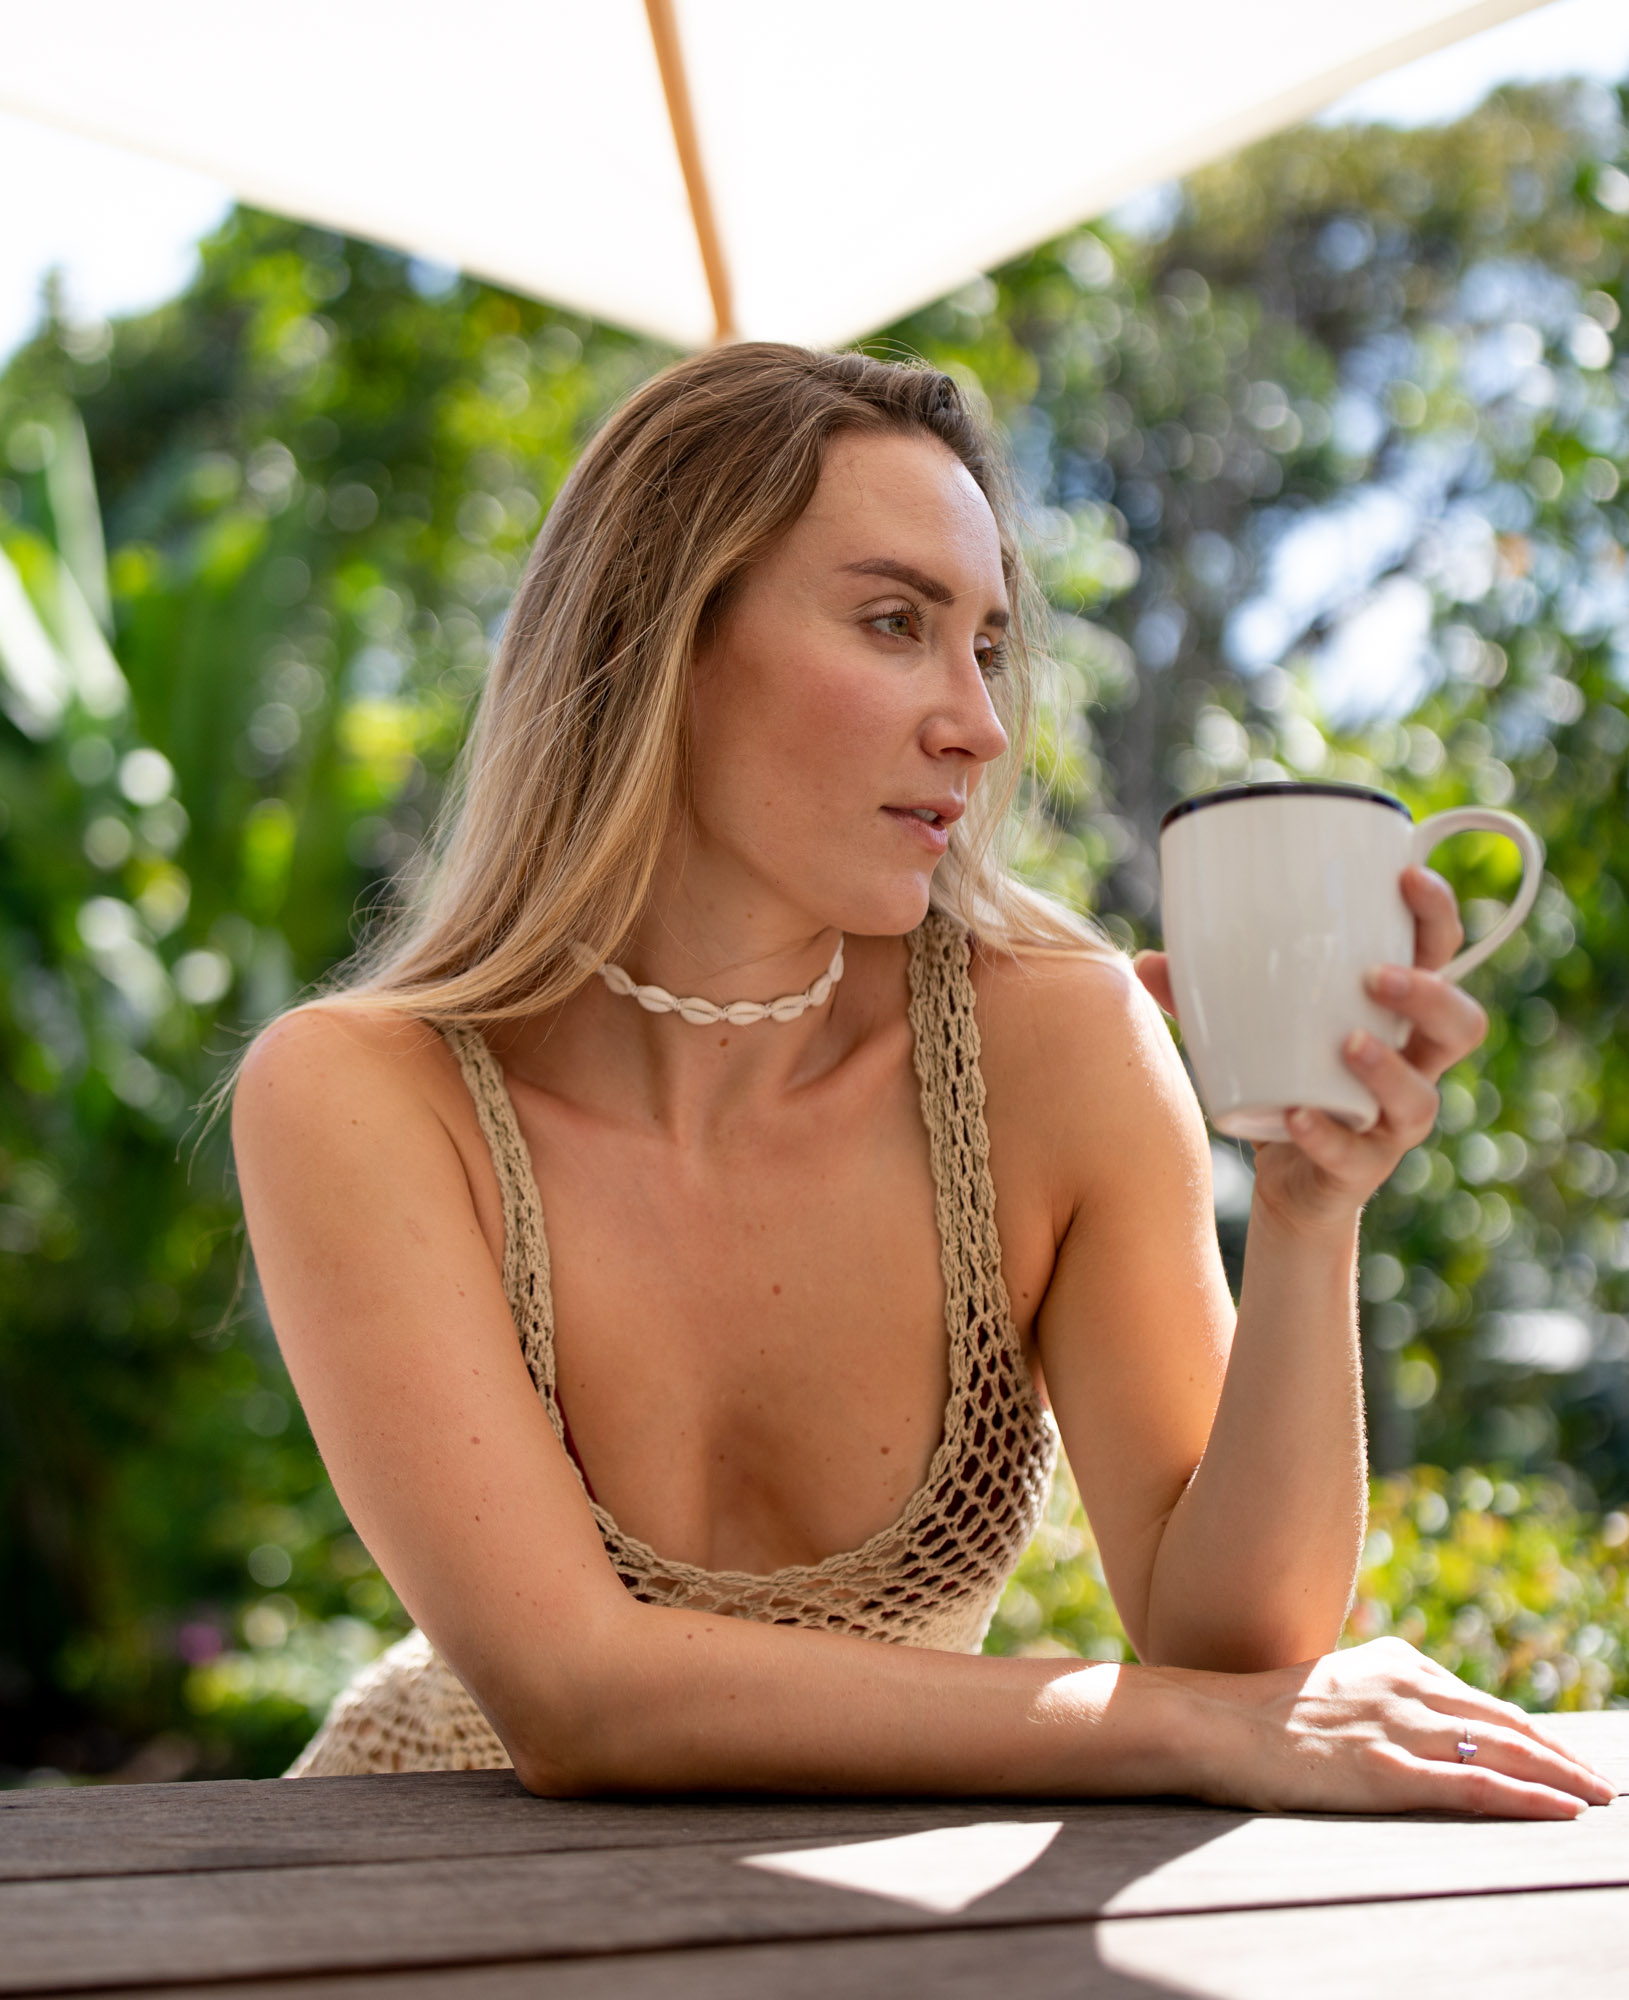 Blonde woman drinks cup of coffee outdoor on sunny day | Swimwear | Lifestyle Photography | Canggu, Bali, Indonesia